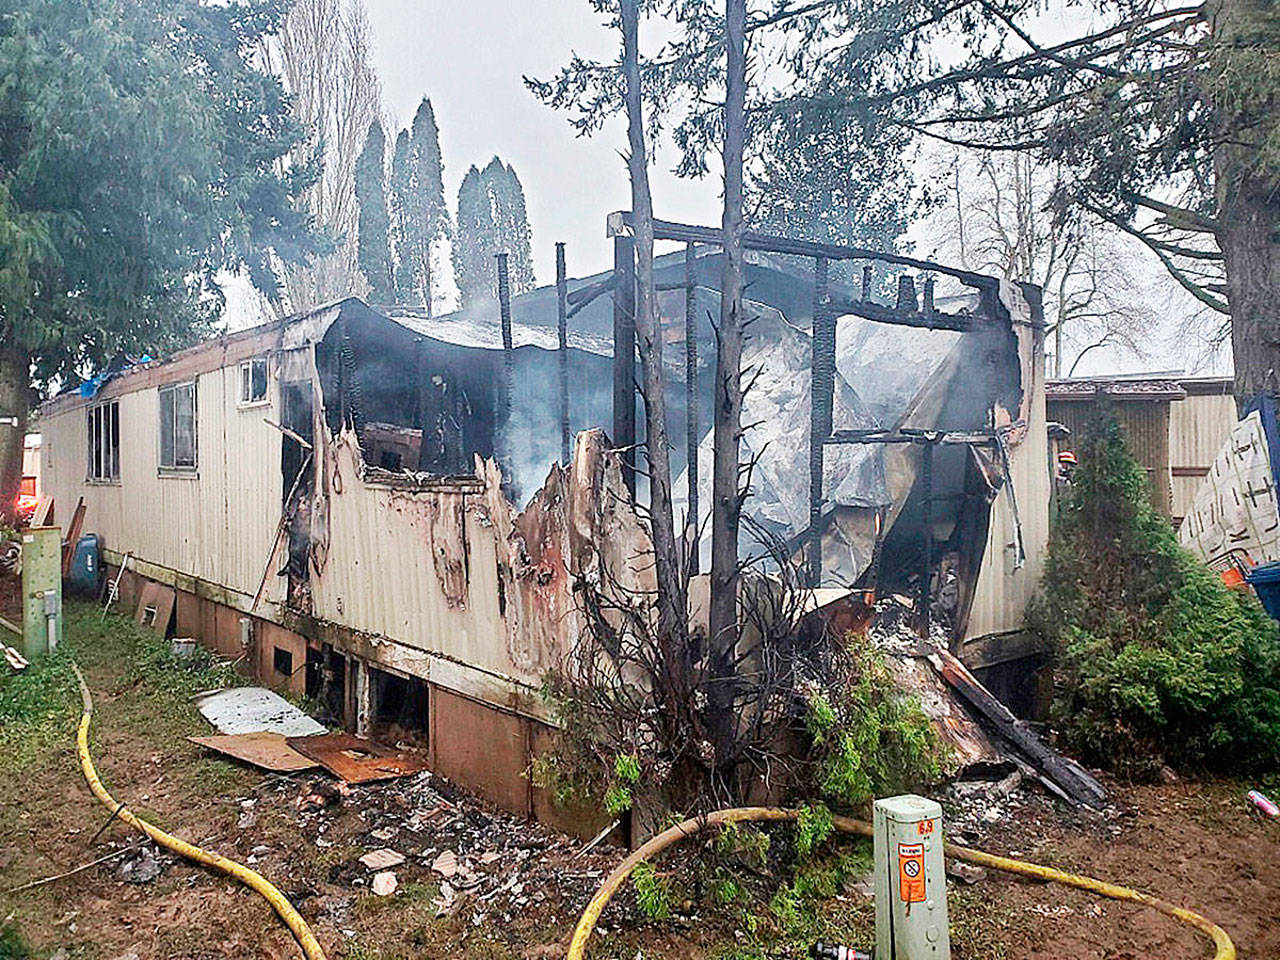 A man and a woman died in a Jan. 6 fire at the Circle K Mobile Home Park in the Kent Valley. COURTESY PHOTO, Puget Sound Fire